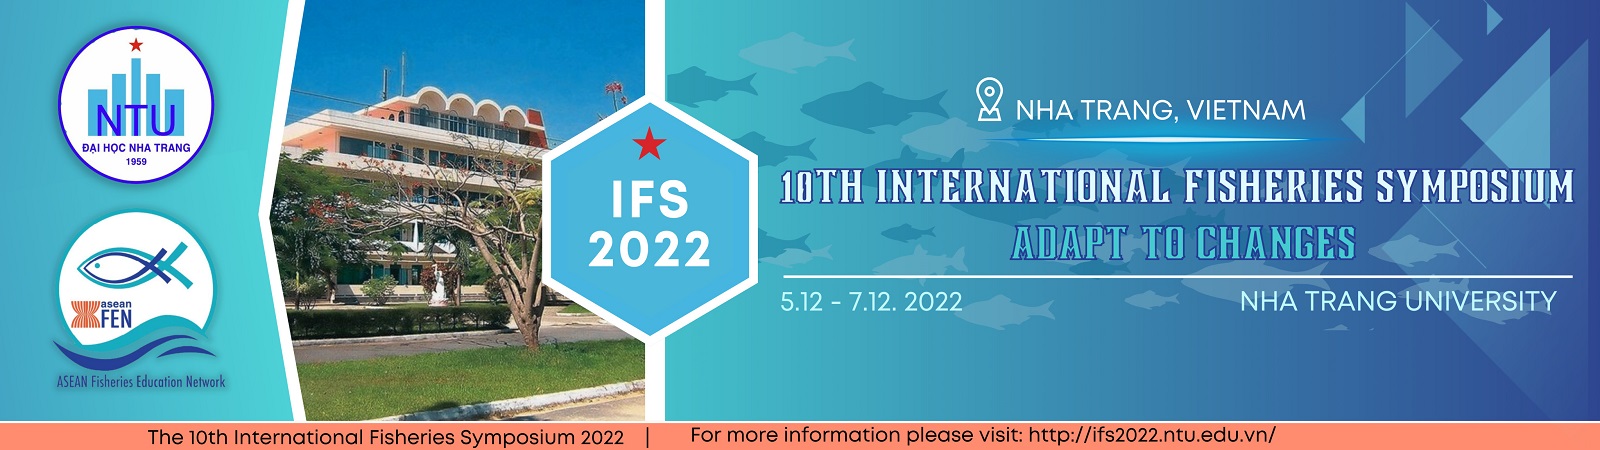 10th INTERNATIONAL FISHERIES SYMPOSIUM AND ASEAN FISHERIES EDUCATION NETWORK